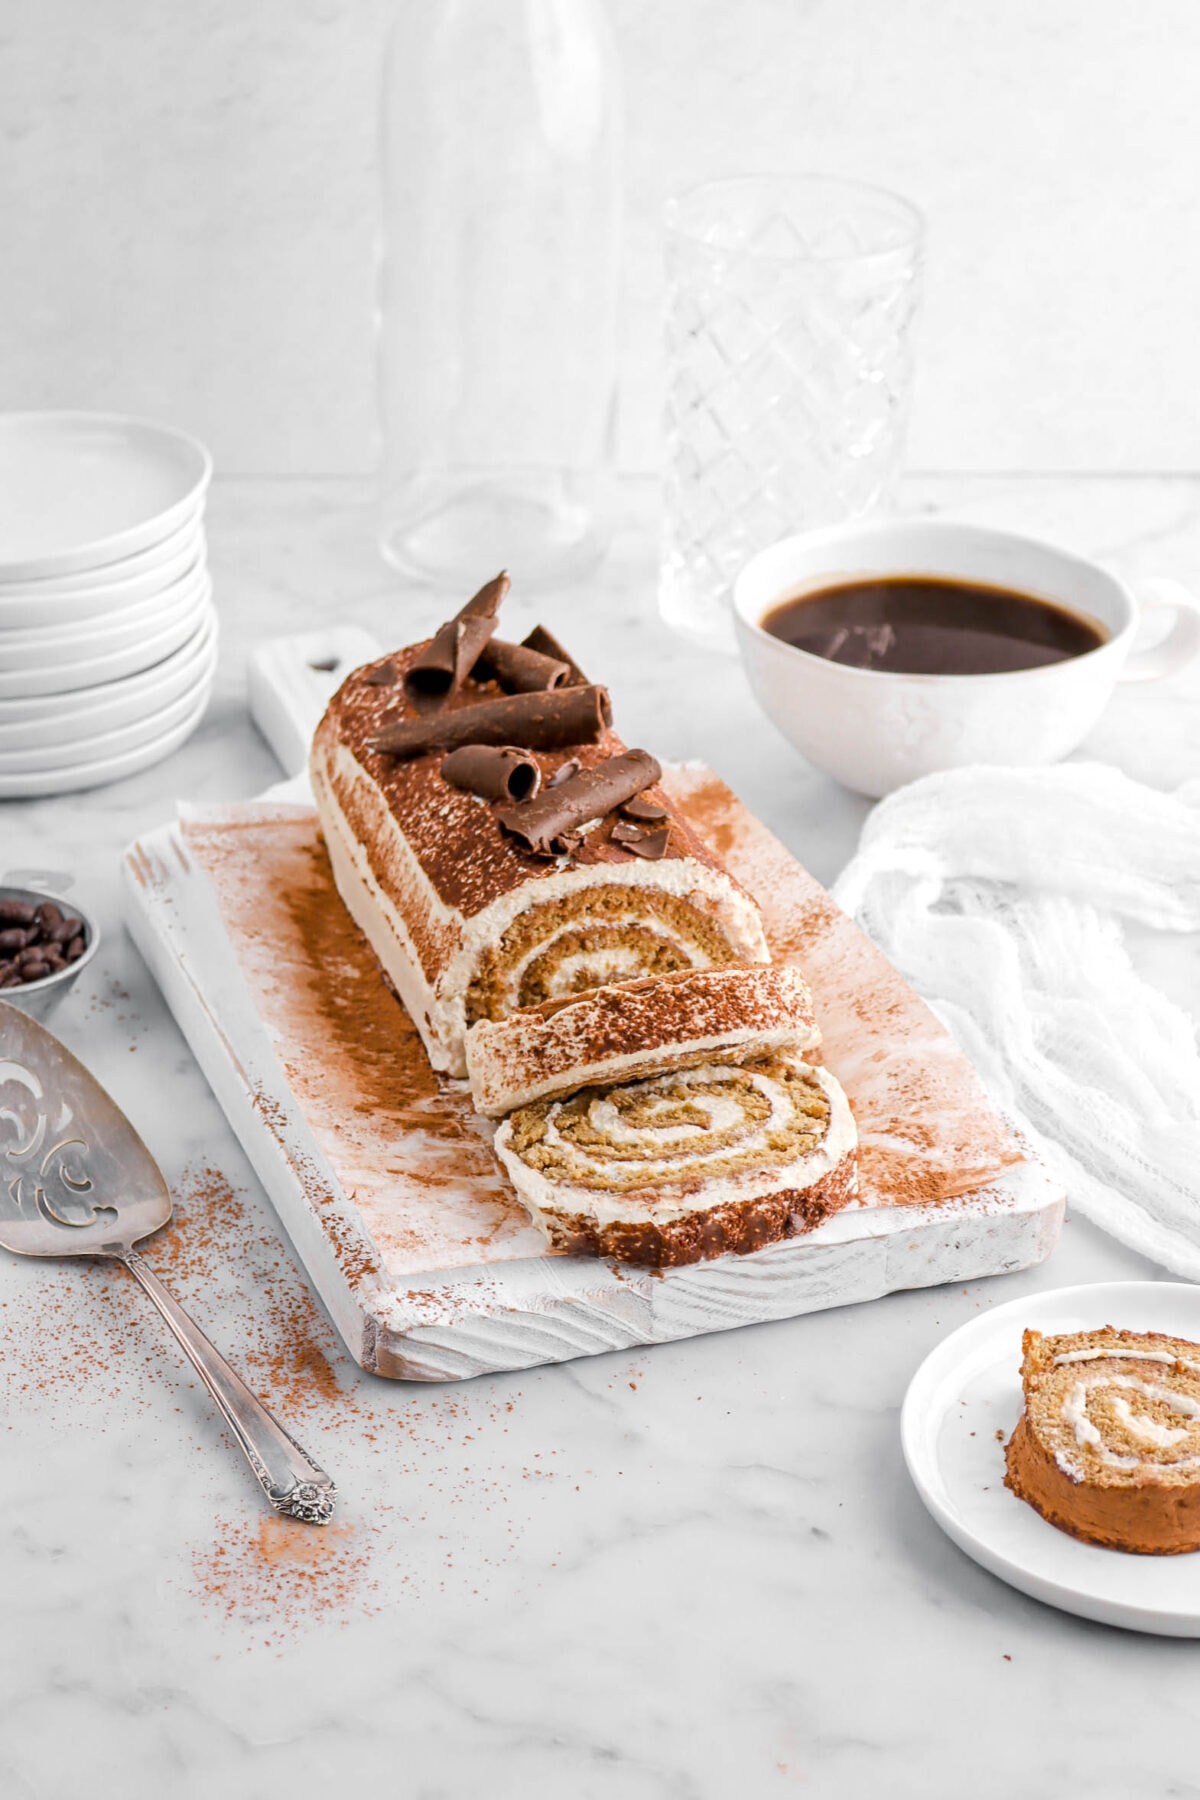 two slices of cake in front of tiramisu cake roll on white wood board with another slice of cake on white plate in front, a cup of coffee behind, and a cake knife beside.